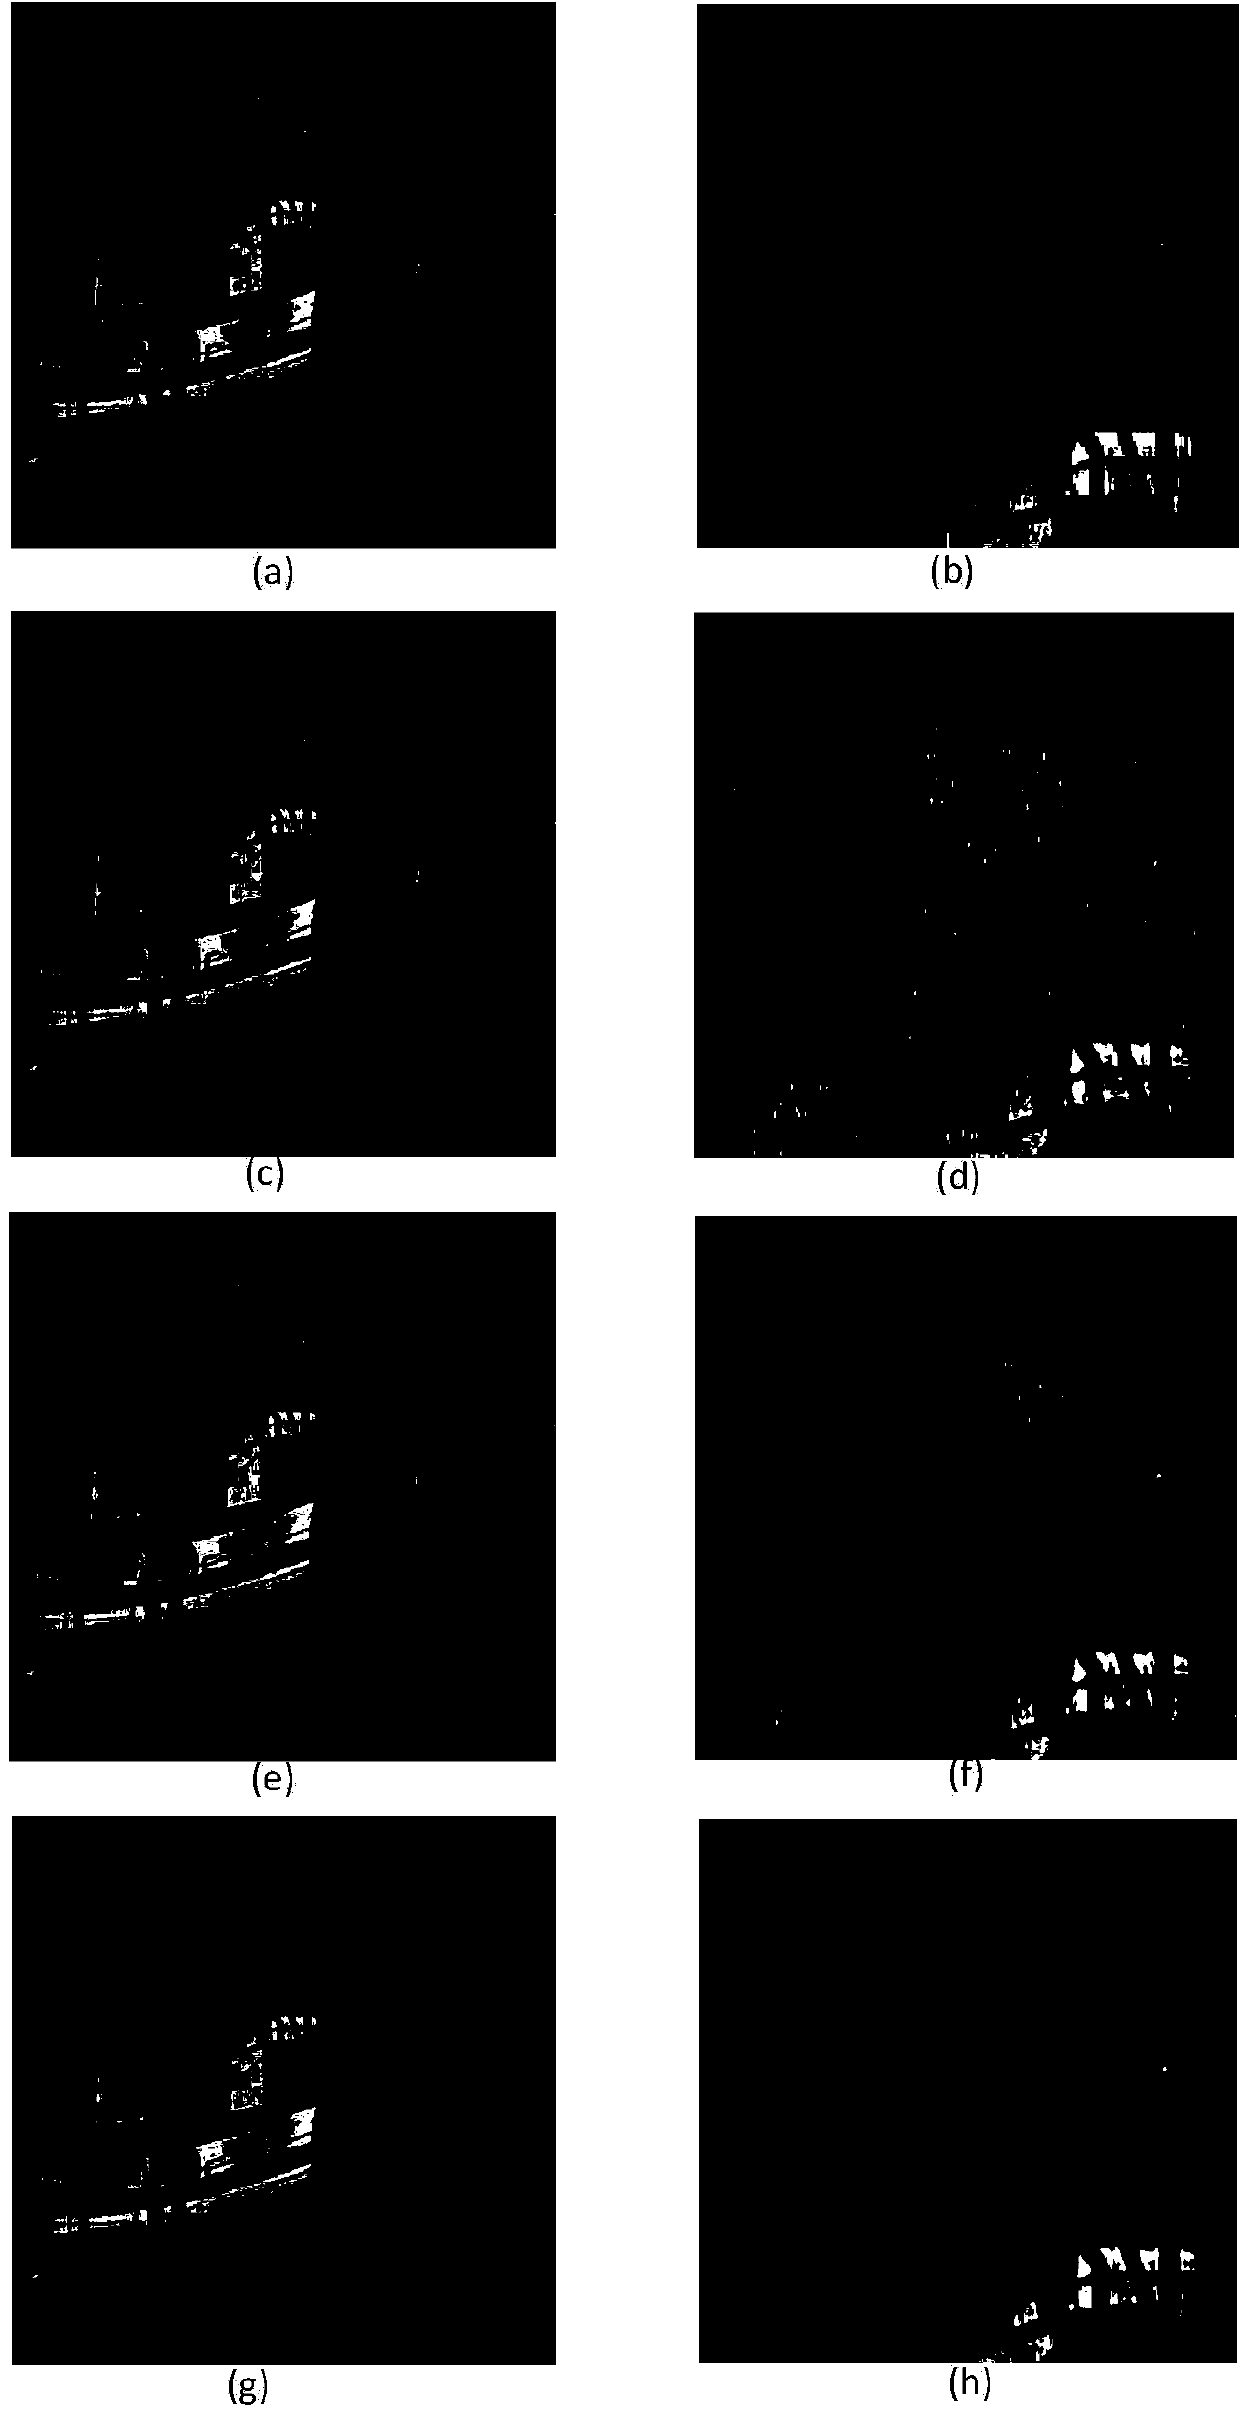 Compressed sensing image reconstruction method based on relevance vector grouping